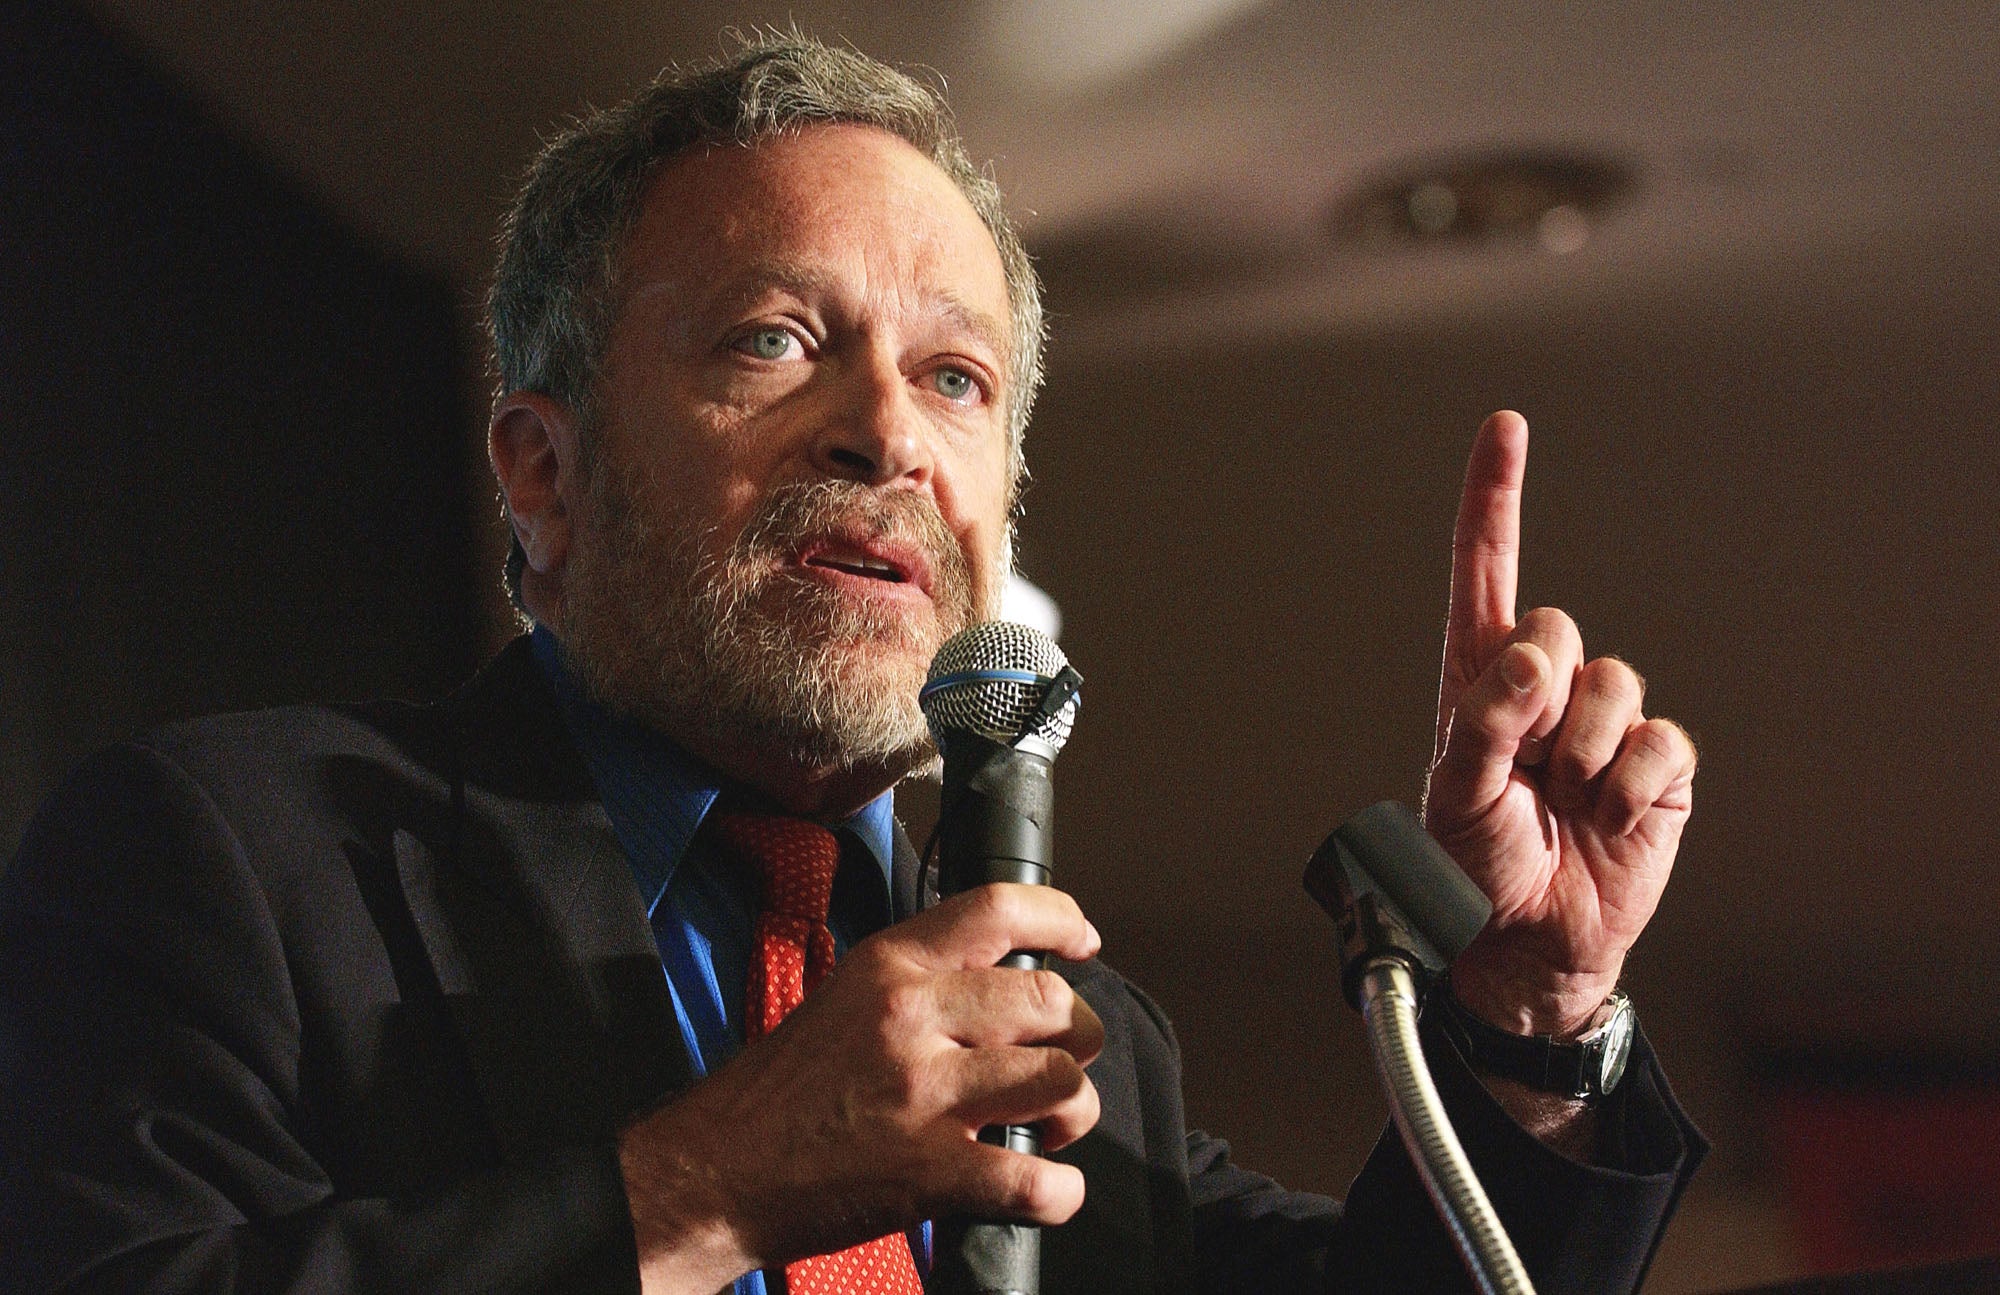 UC Berkeley professor Robert Reich called for Marjorie Taylor Greene to be expelled from Congress